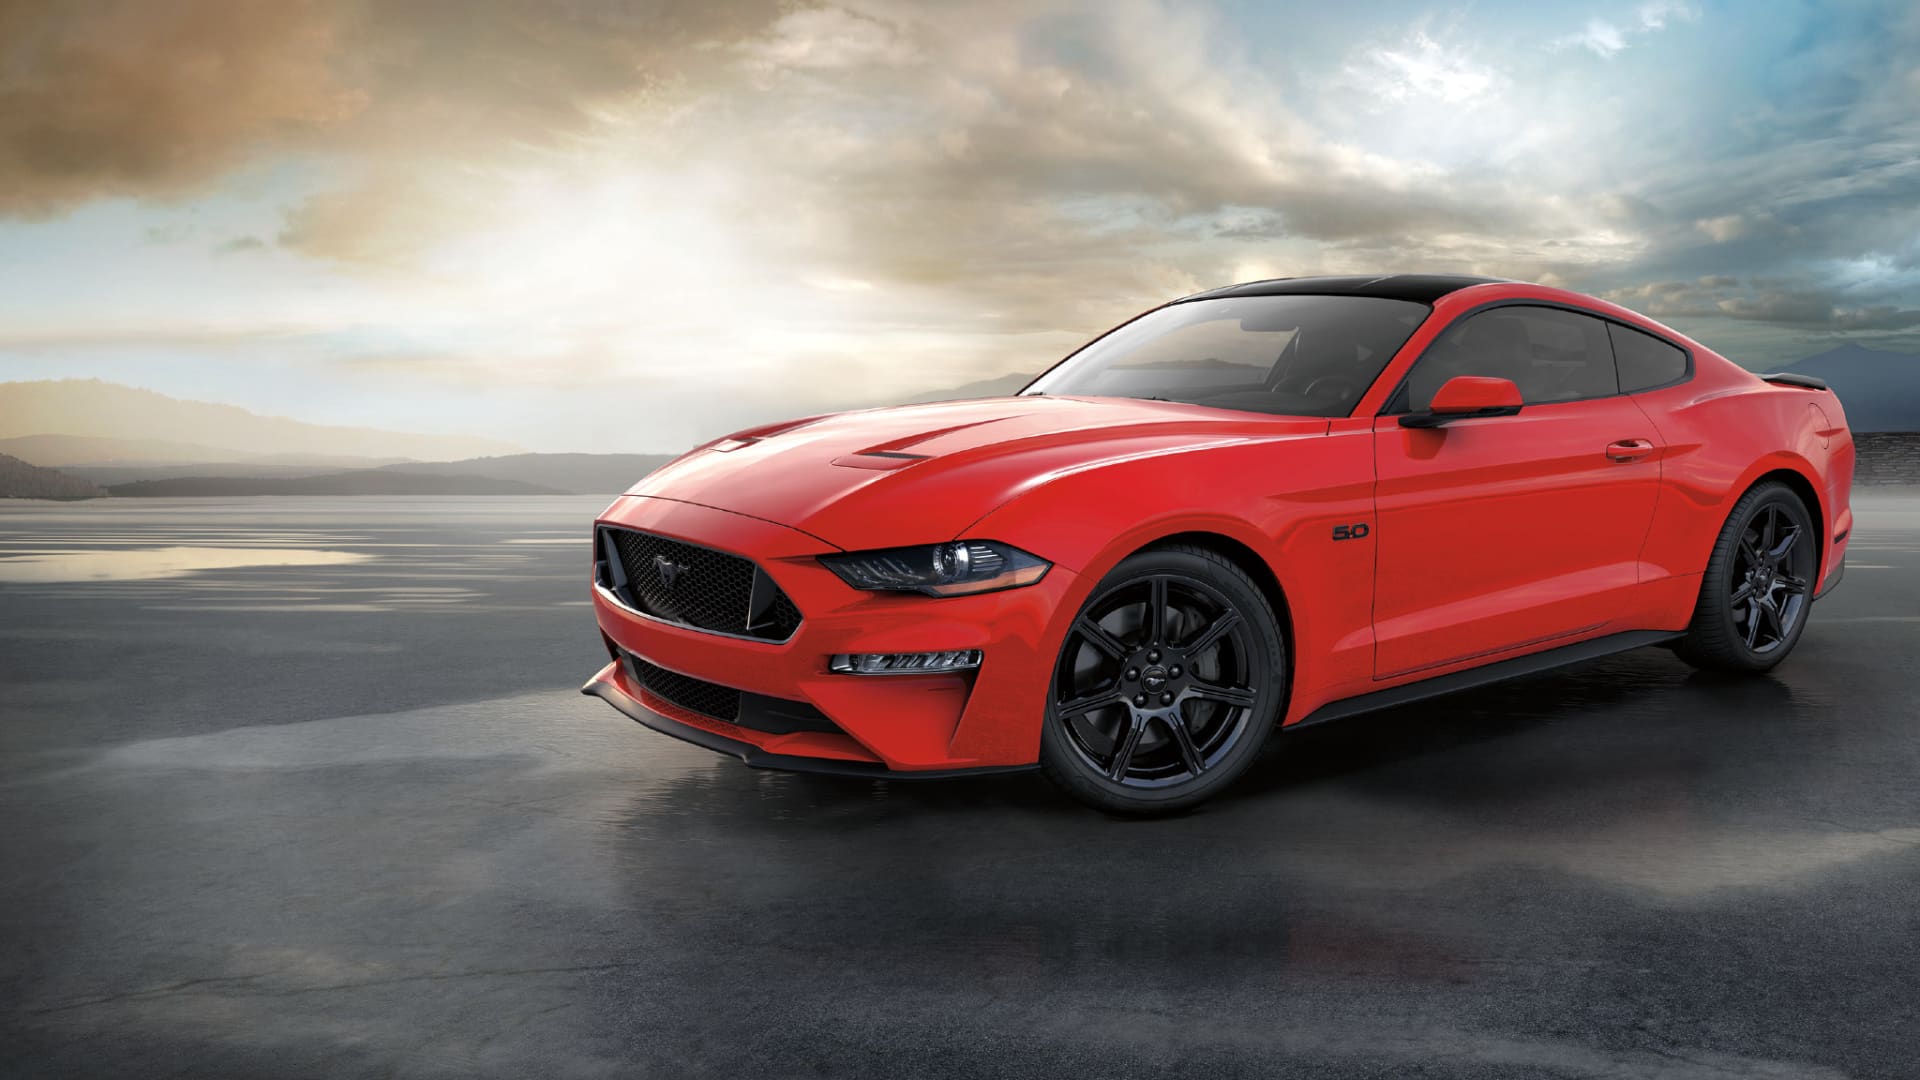 The Ford Mustang Was the World's Best Selling Sports Car in 2019